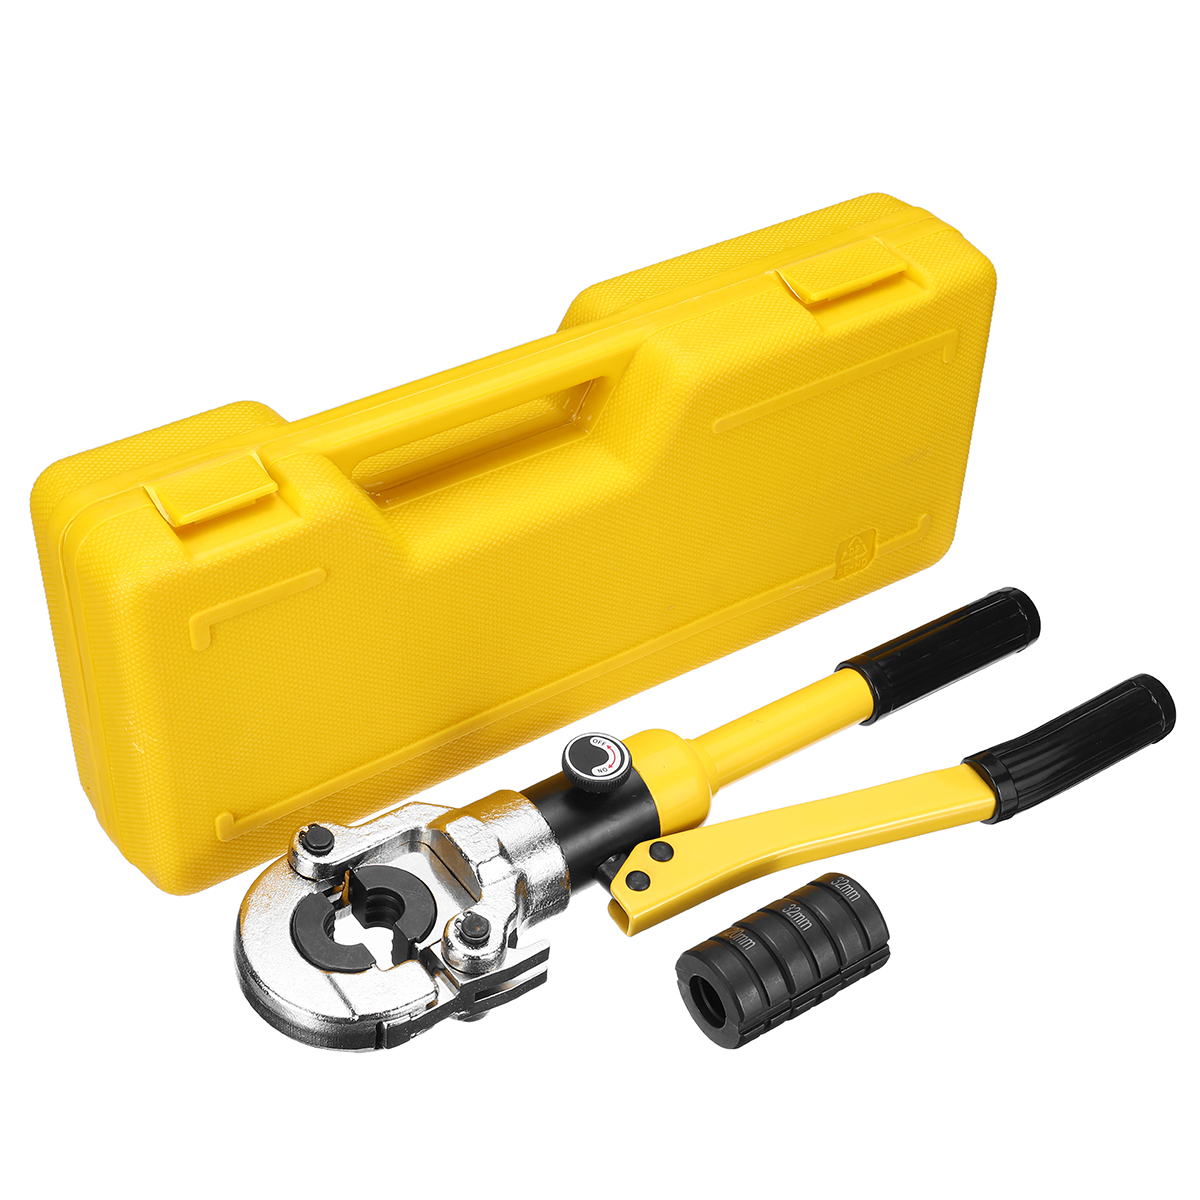 Find 16 32mm Pressure Pipe Wrench Plumbing Pipe Press Clamp Tool 10T Crimping Force Stainless Steel Hand Tools for Sale on Gipsybee.com with cryptocurrencies